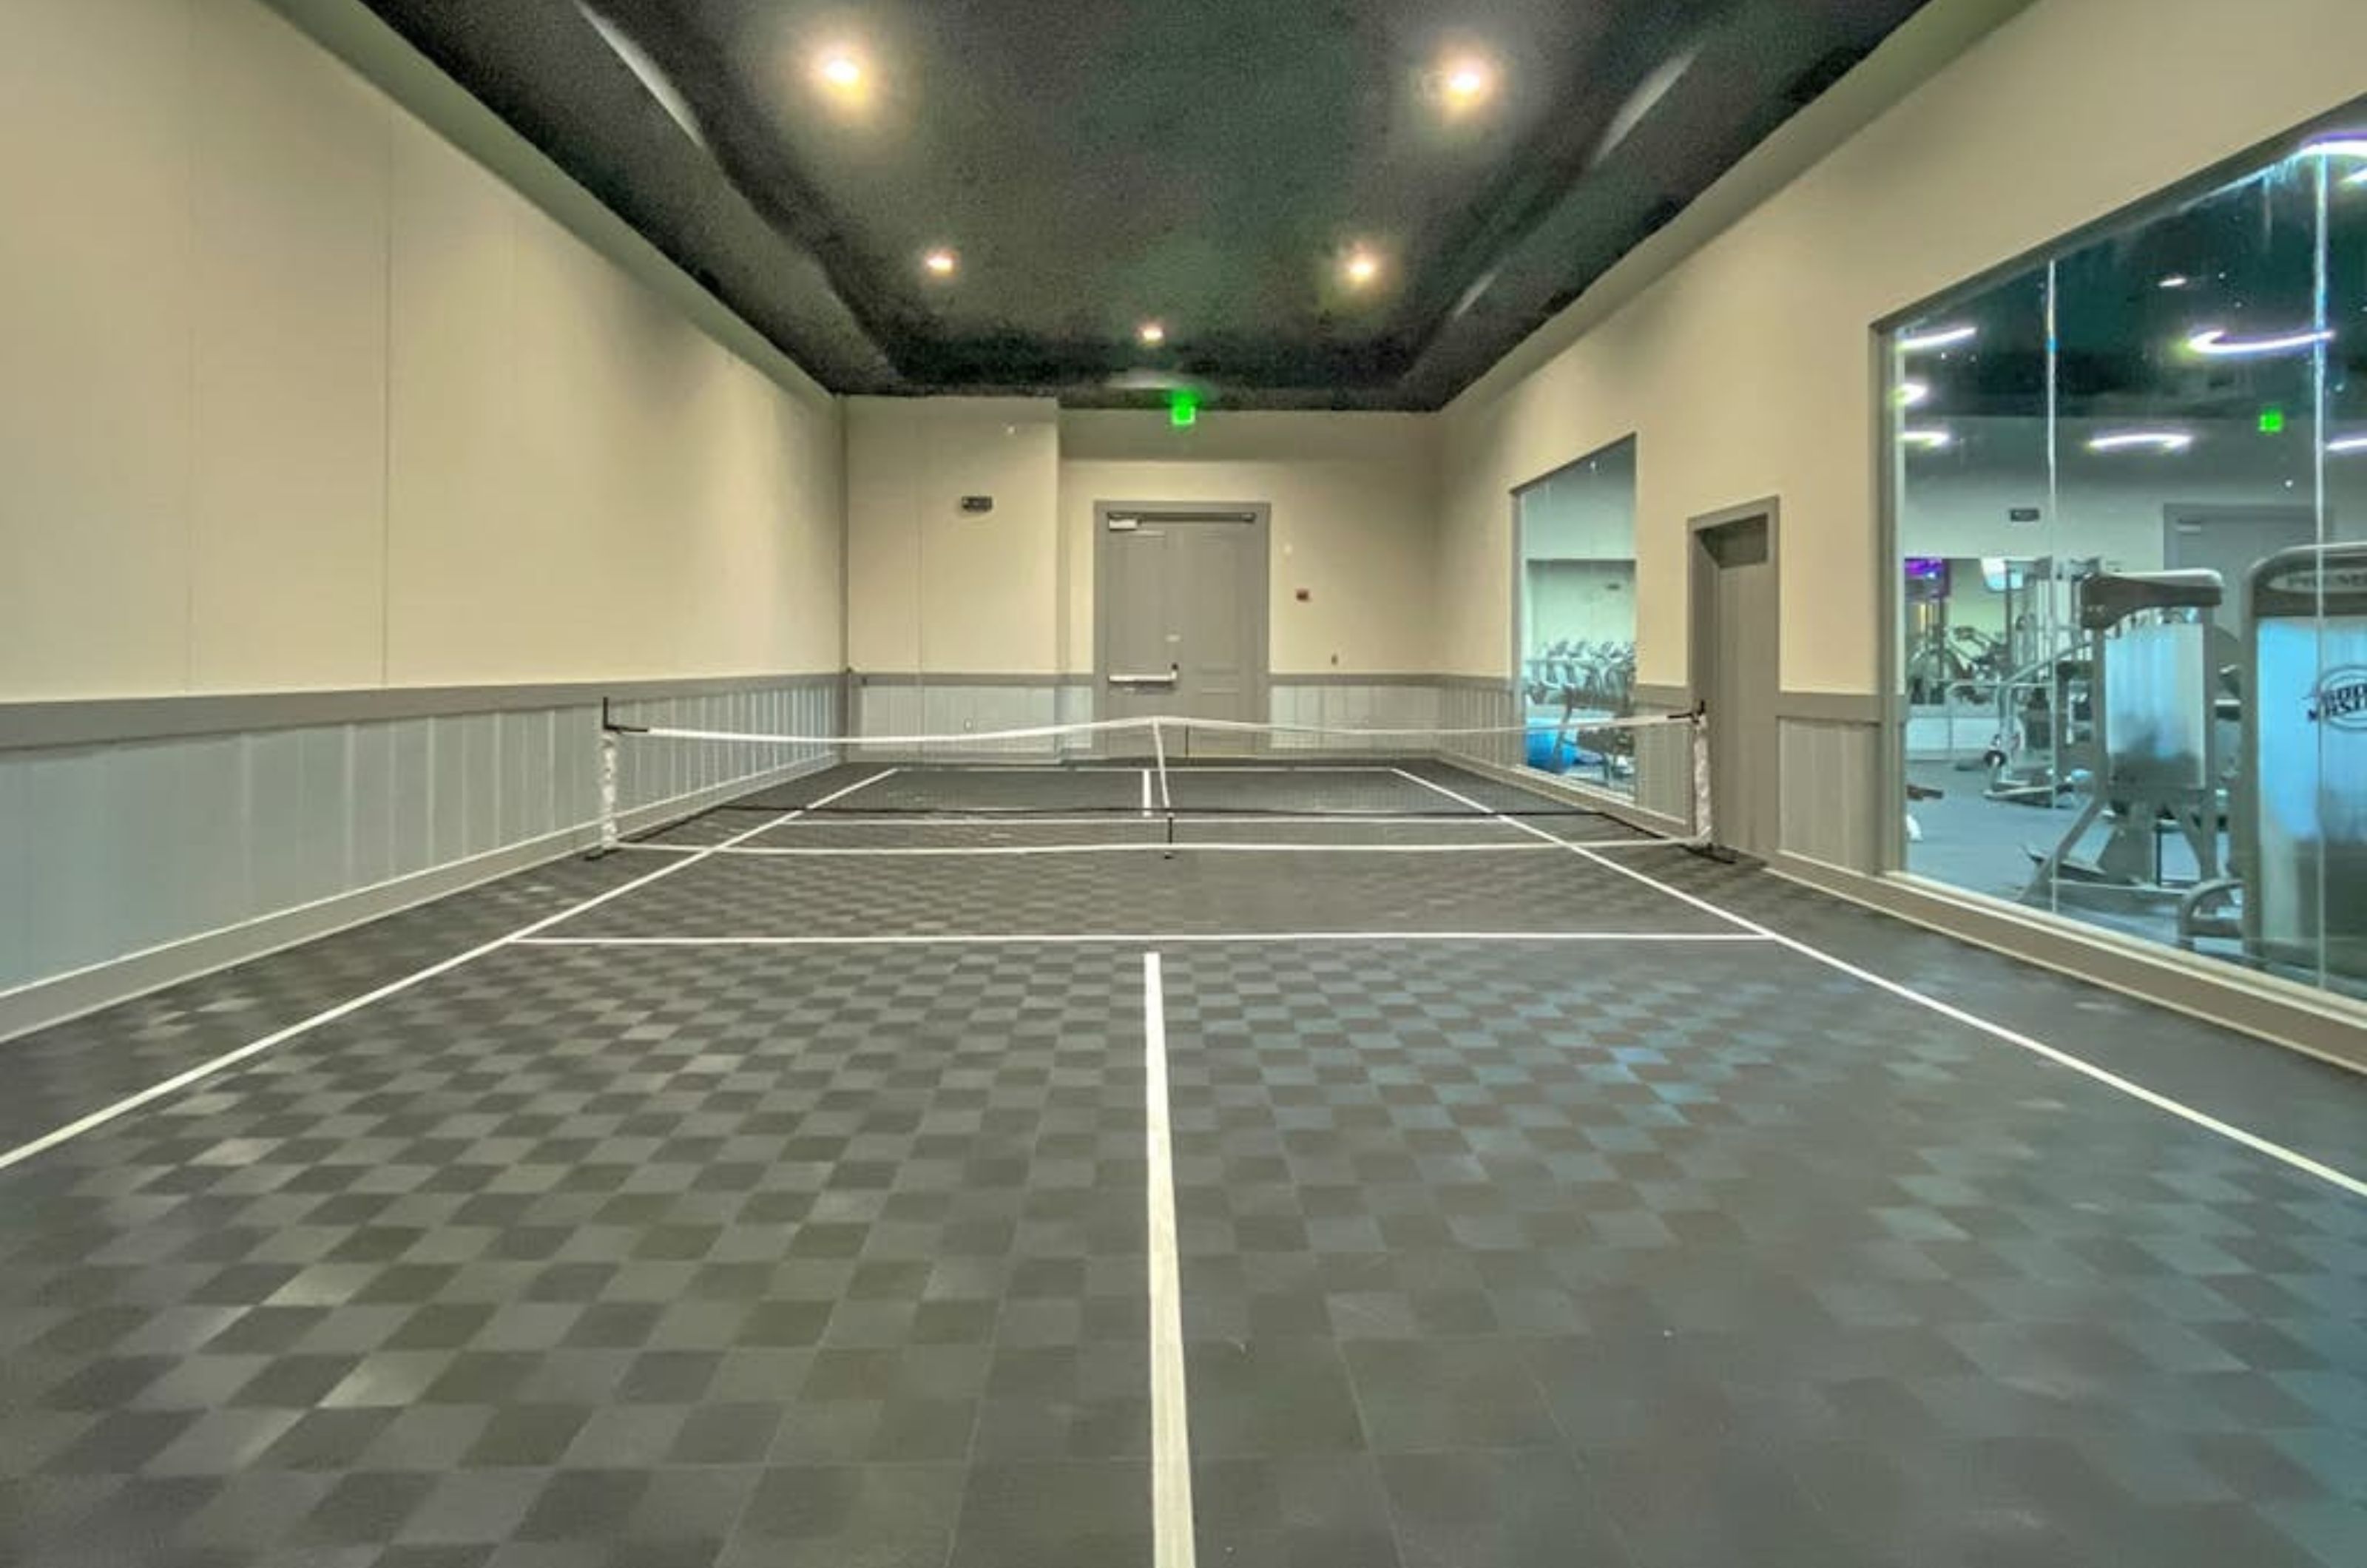 The indoor tennis court with windows overlooking the gym at the Palms of Destin 